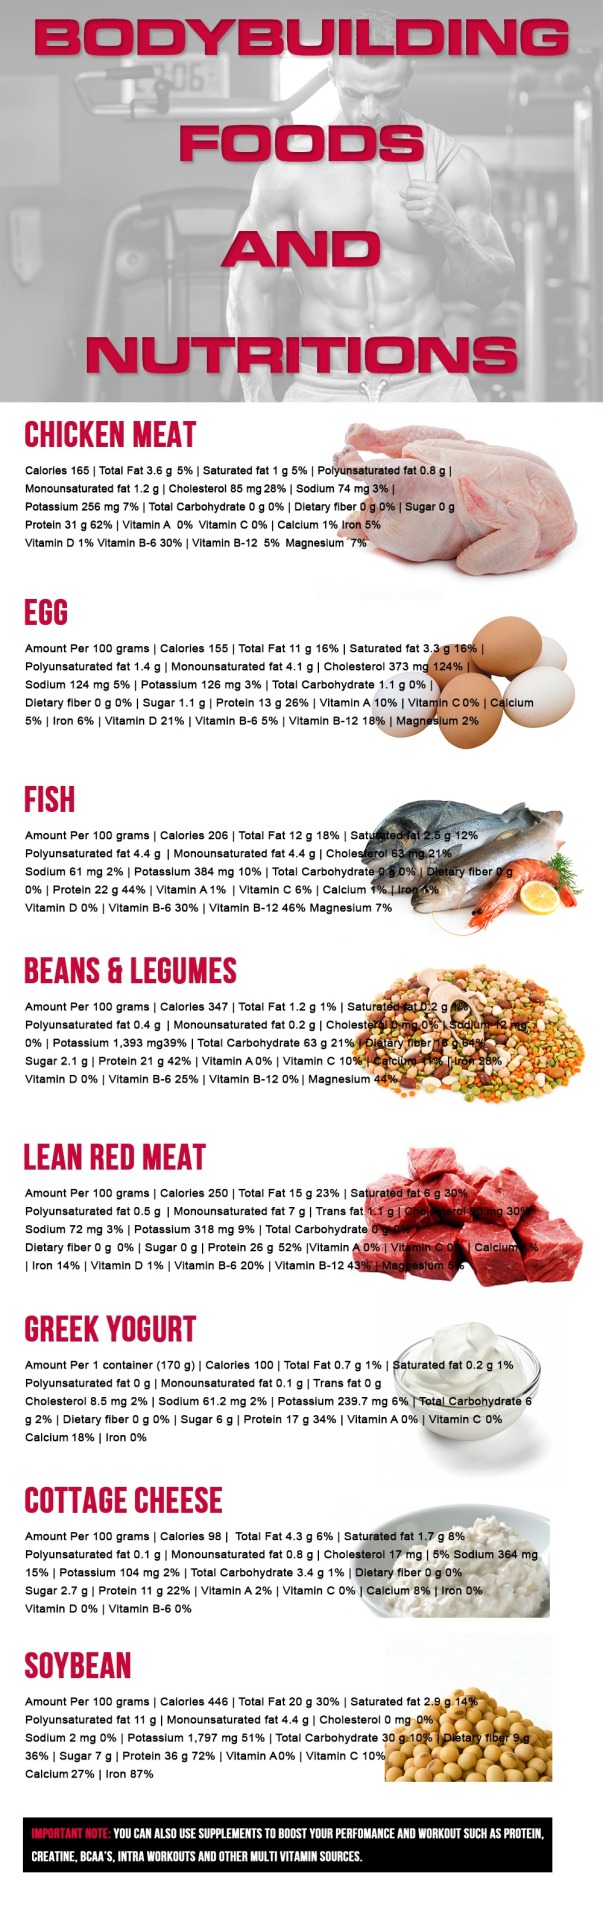 Top 8 Muscle Cutting Diets/Foods Taken By Professional Bodybuilders